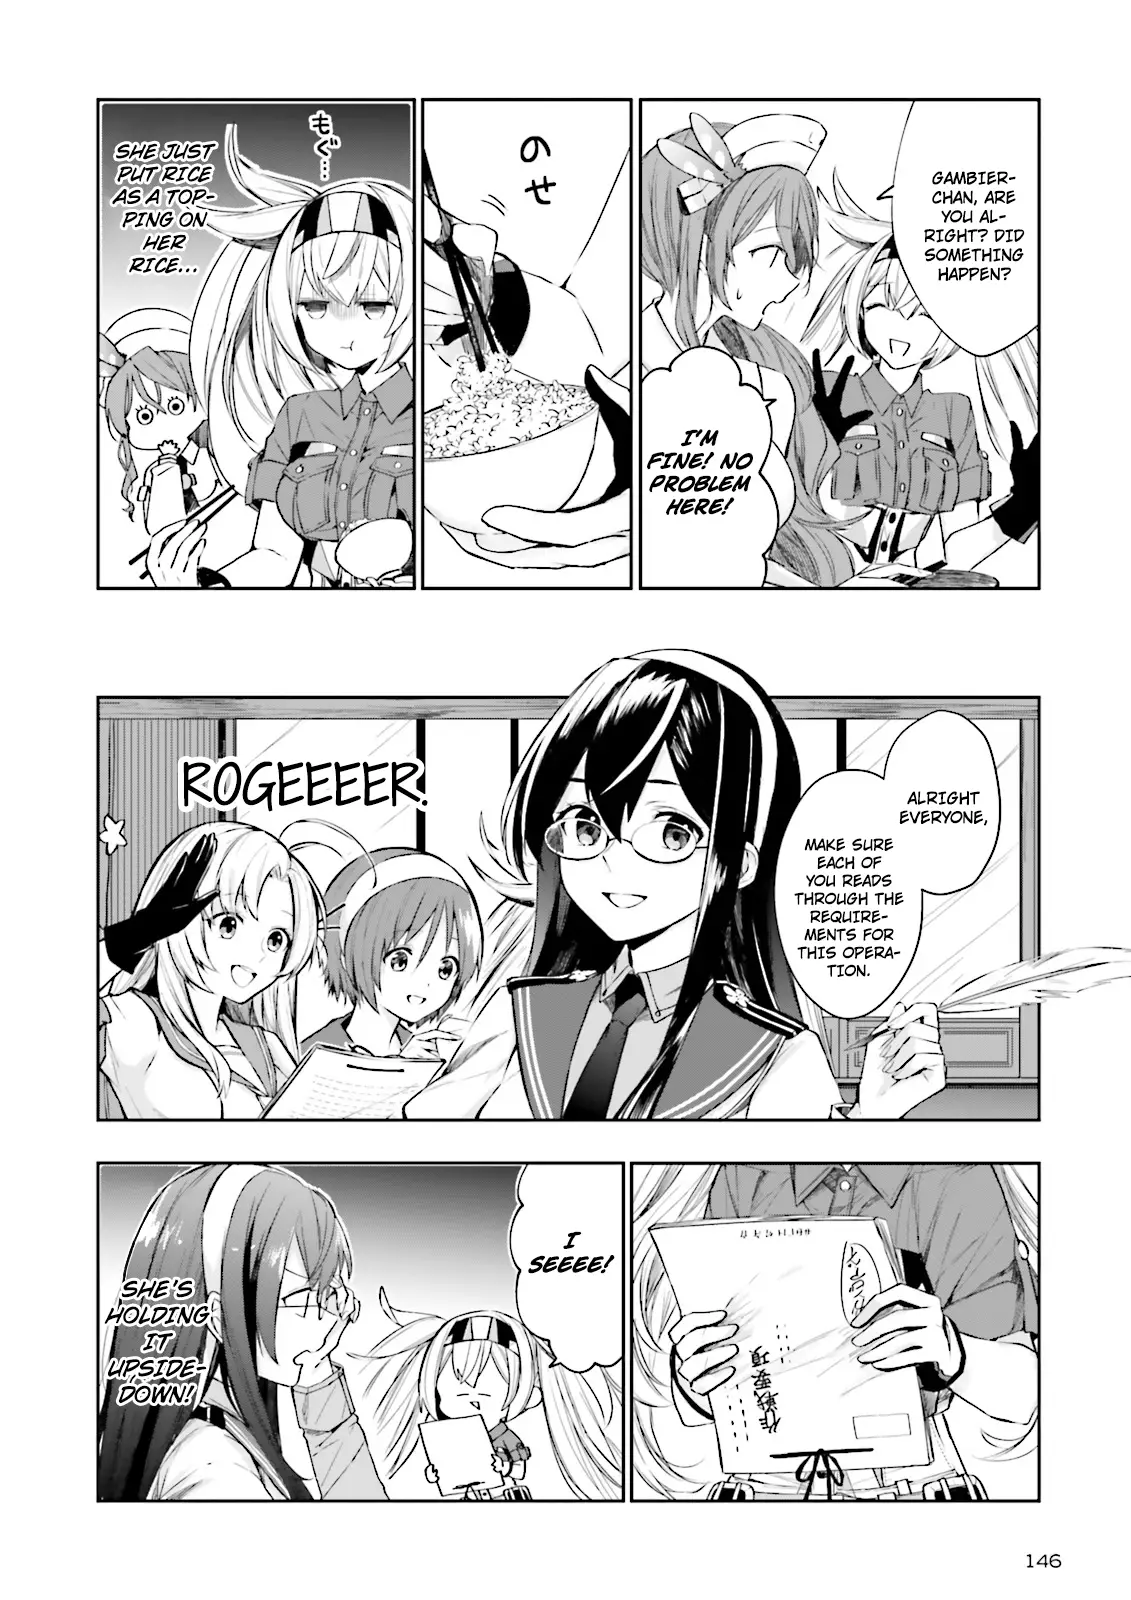 Kantai Collection -Kancolle- Tonight, Another "salute"! - 4 page 4